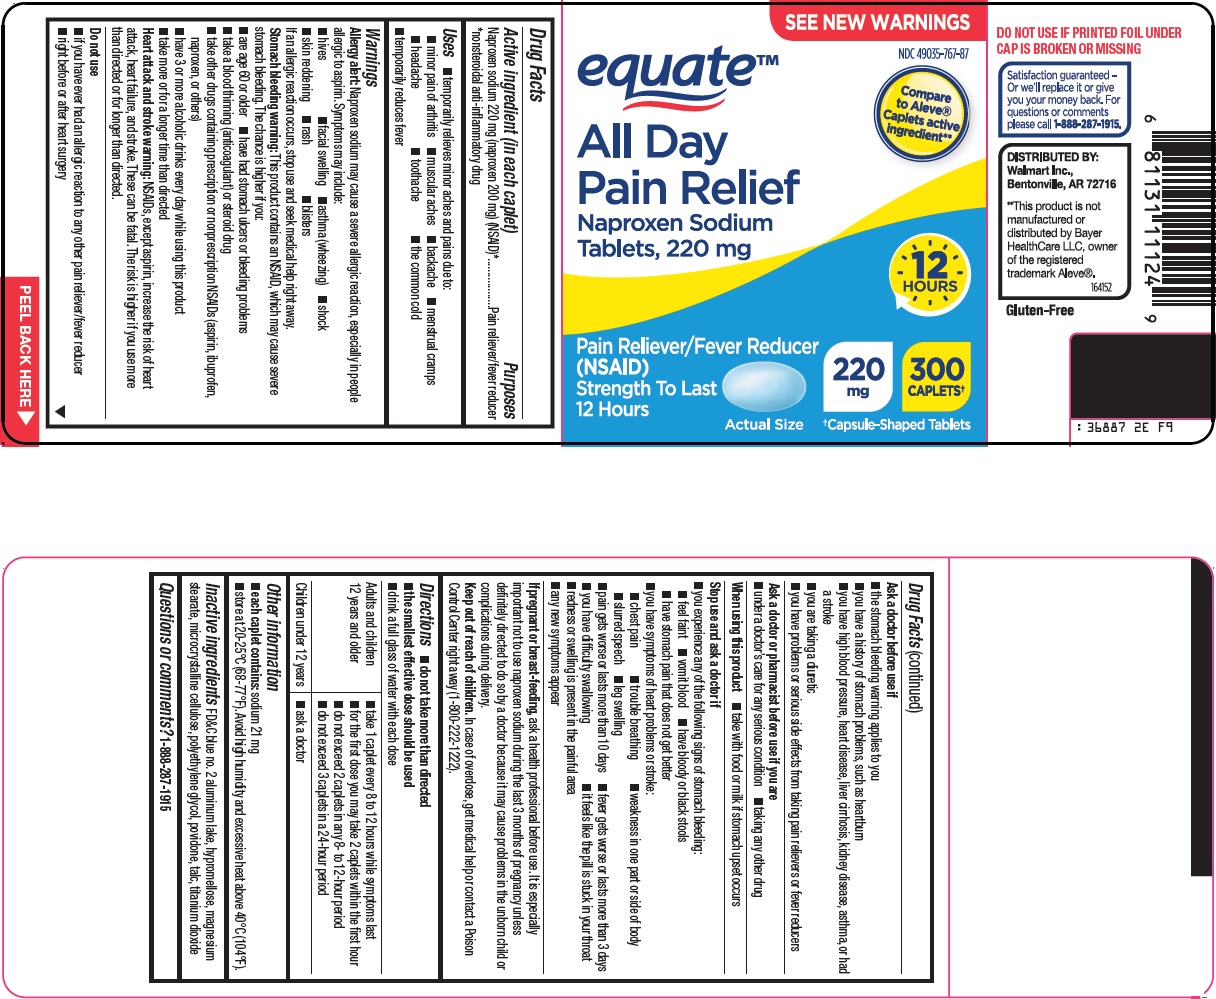 368-2e-all-day-pain-relief.jpg